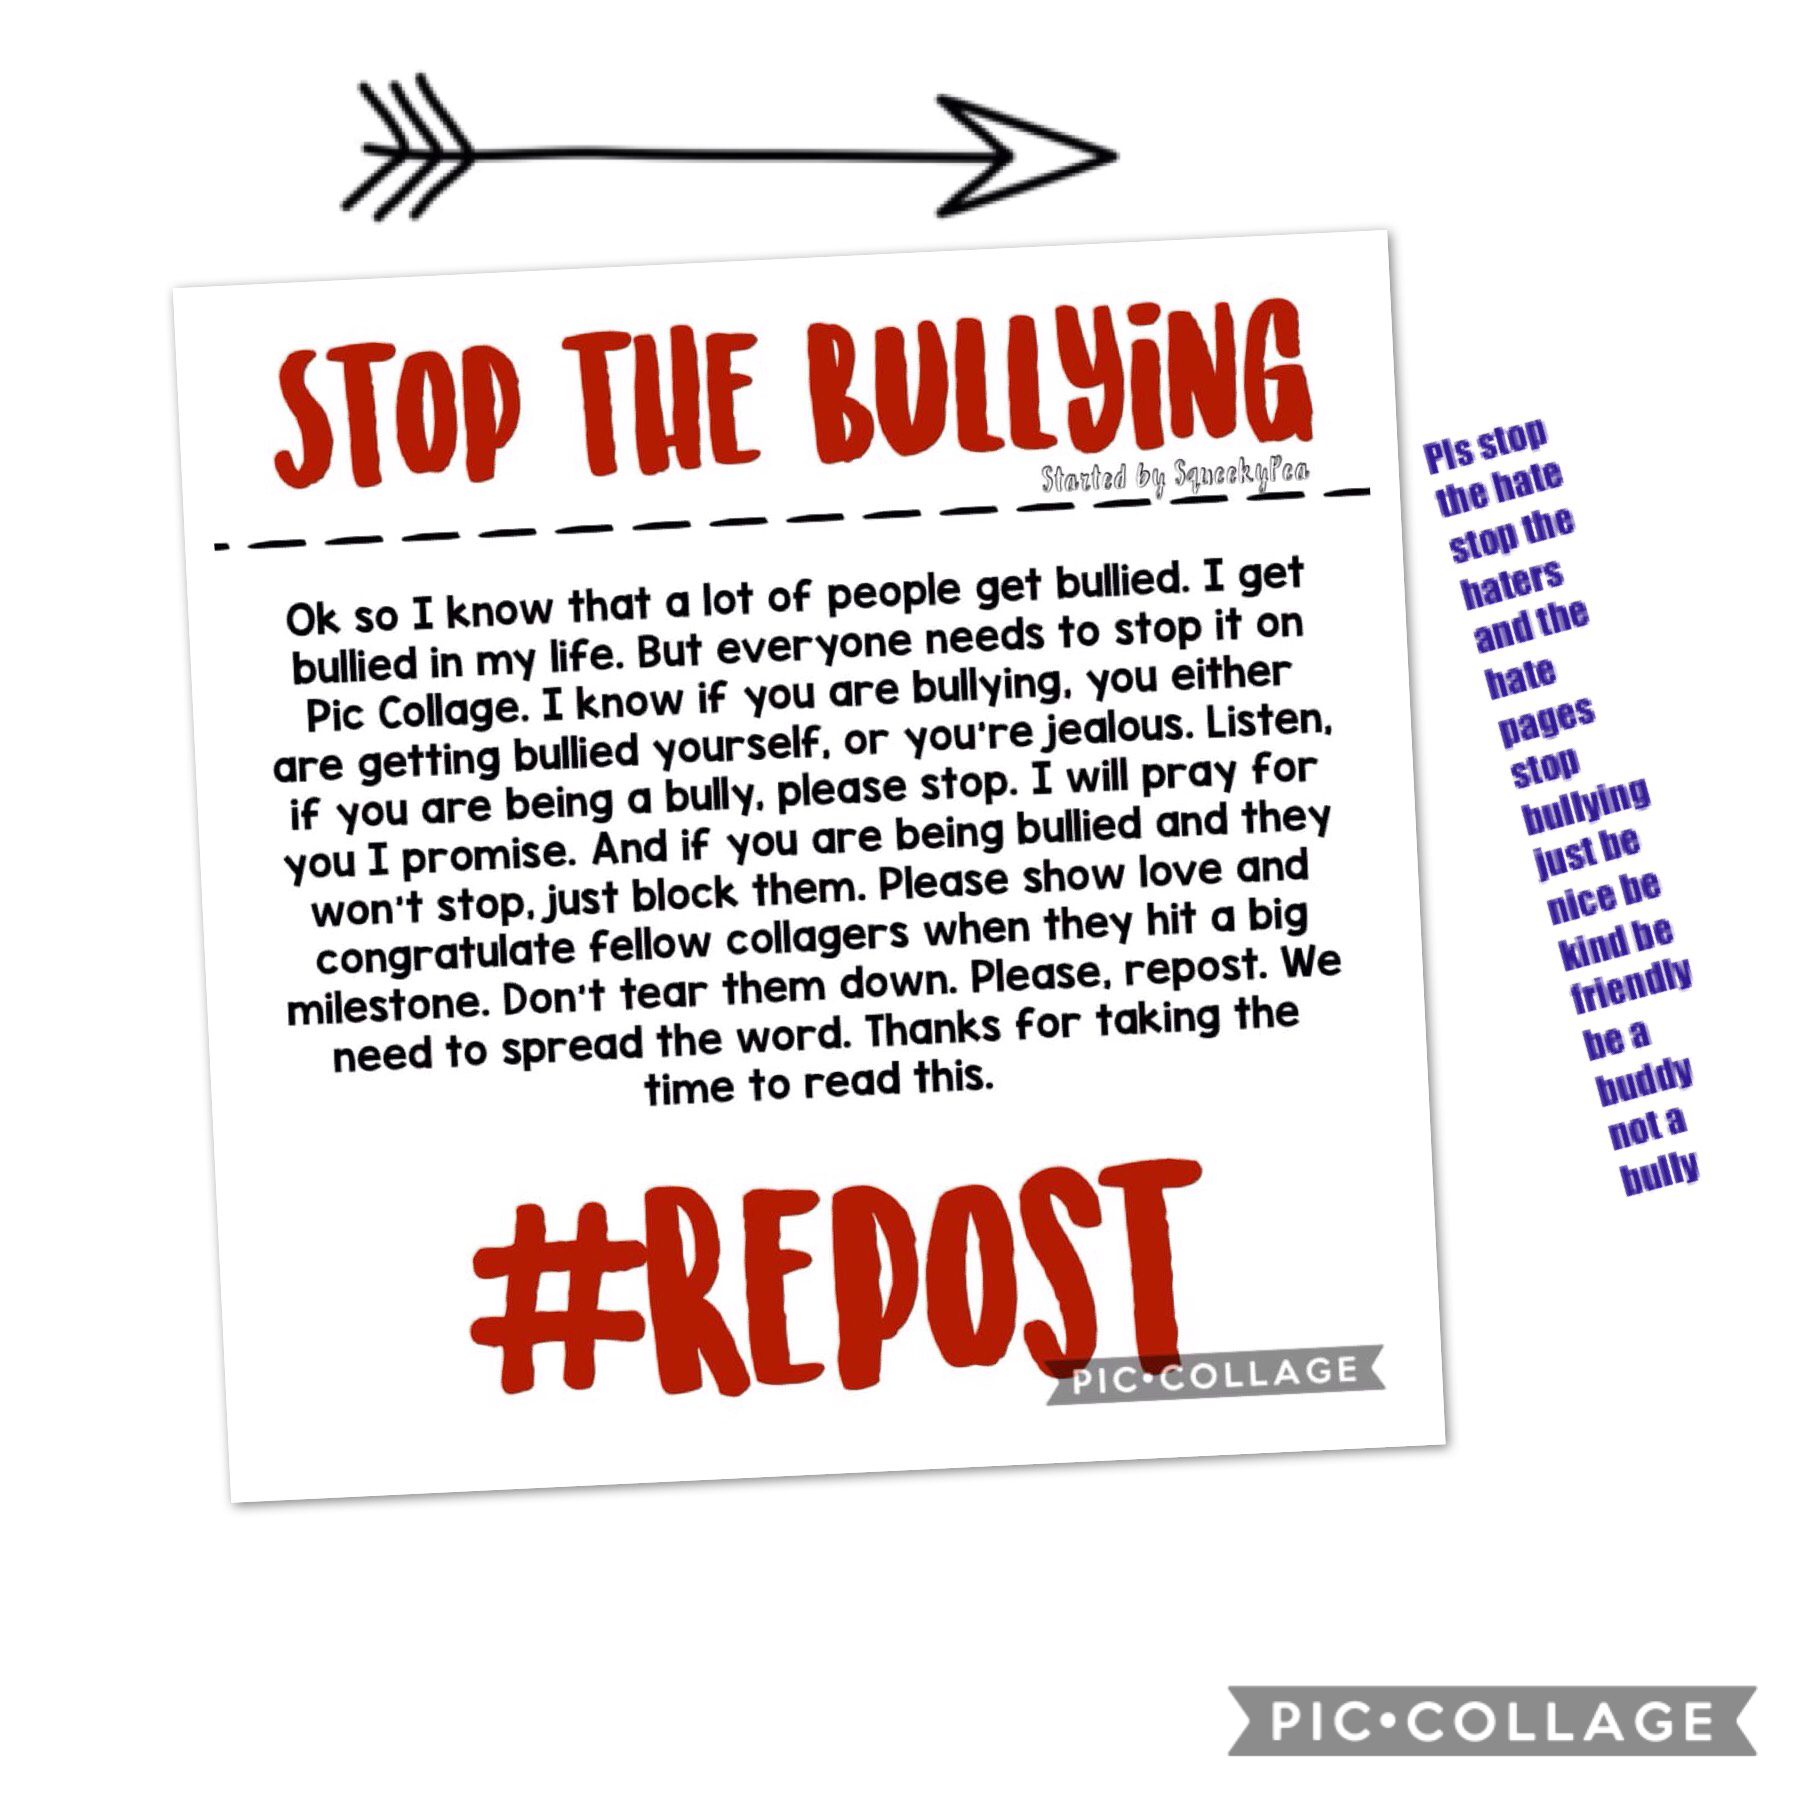 Stop the bullying and tap

STOP THE BULLYING ,the hate , the the hate pages just be kind you would want someone to do the same to you and pls repost and spread awareness about this pls #repost #stopthehate #startthelove ❤️❤️❤️❤️💕